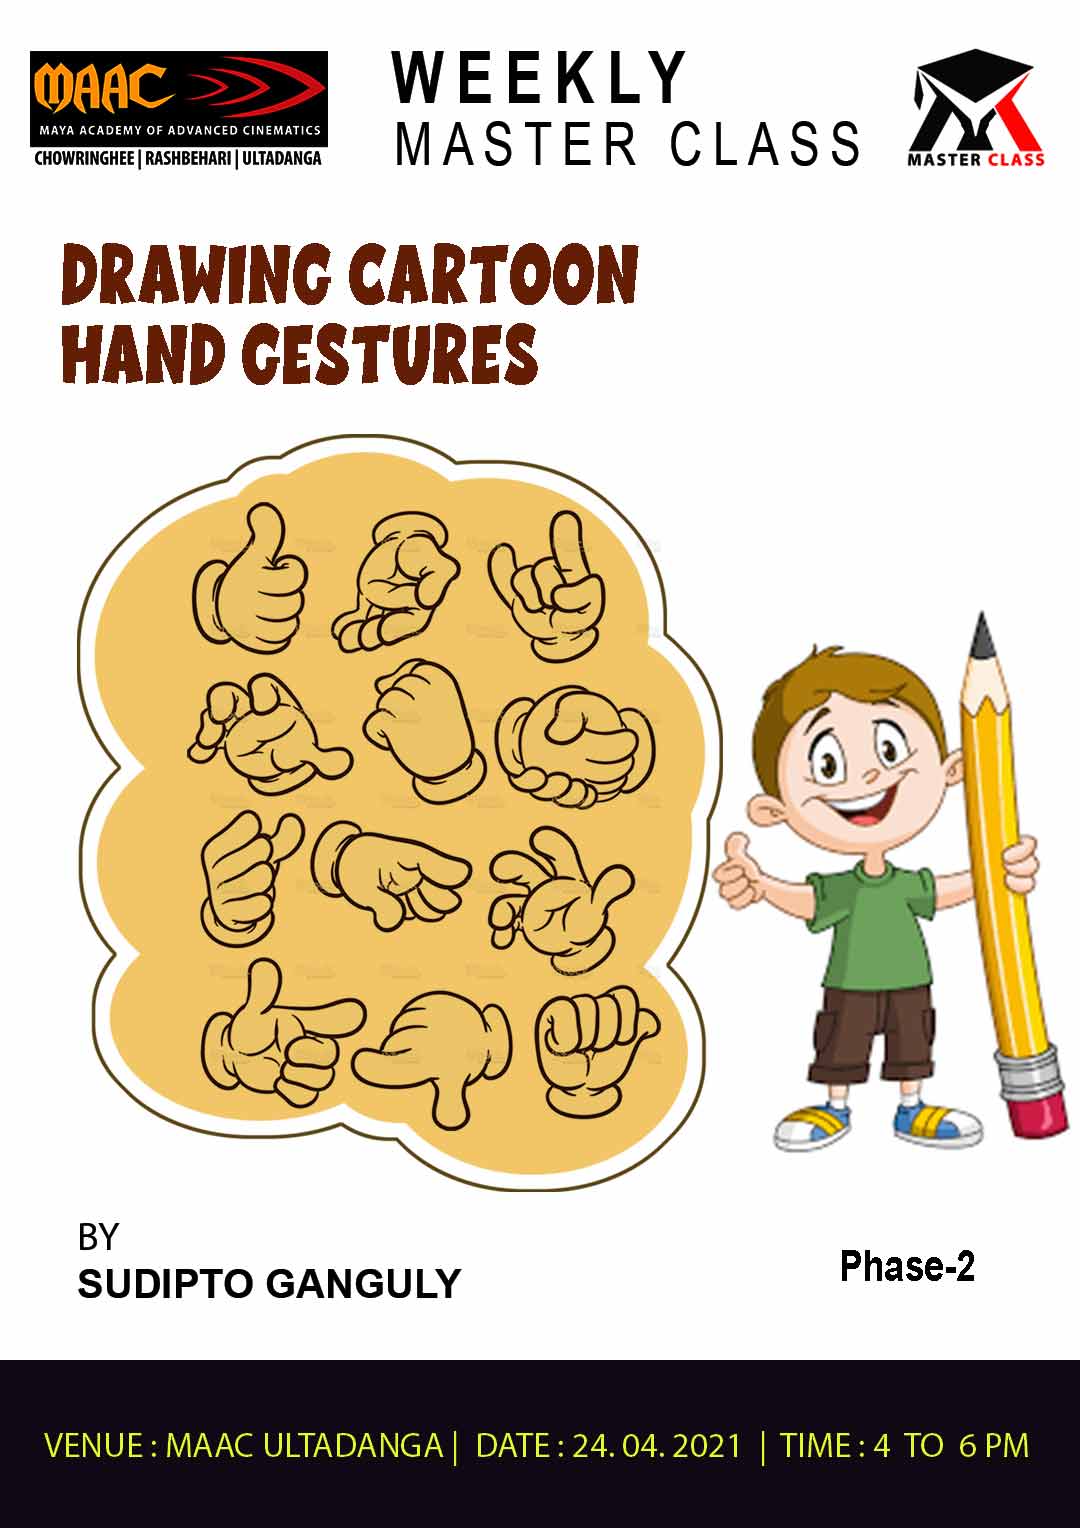 Weekly Master Class on Drawing Cartoon Hand Gestures Phase 2